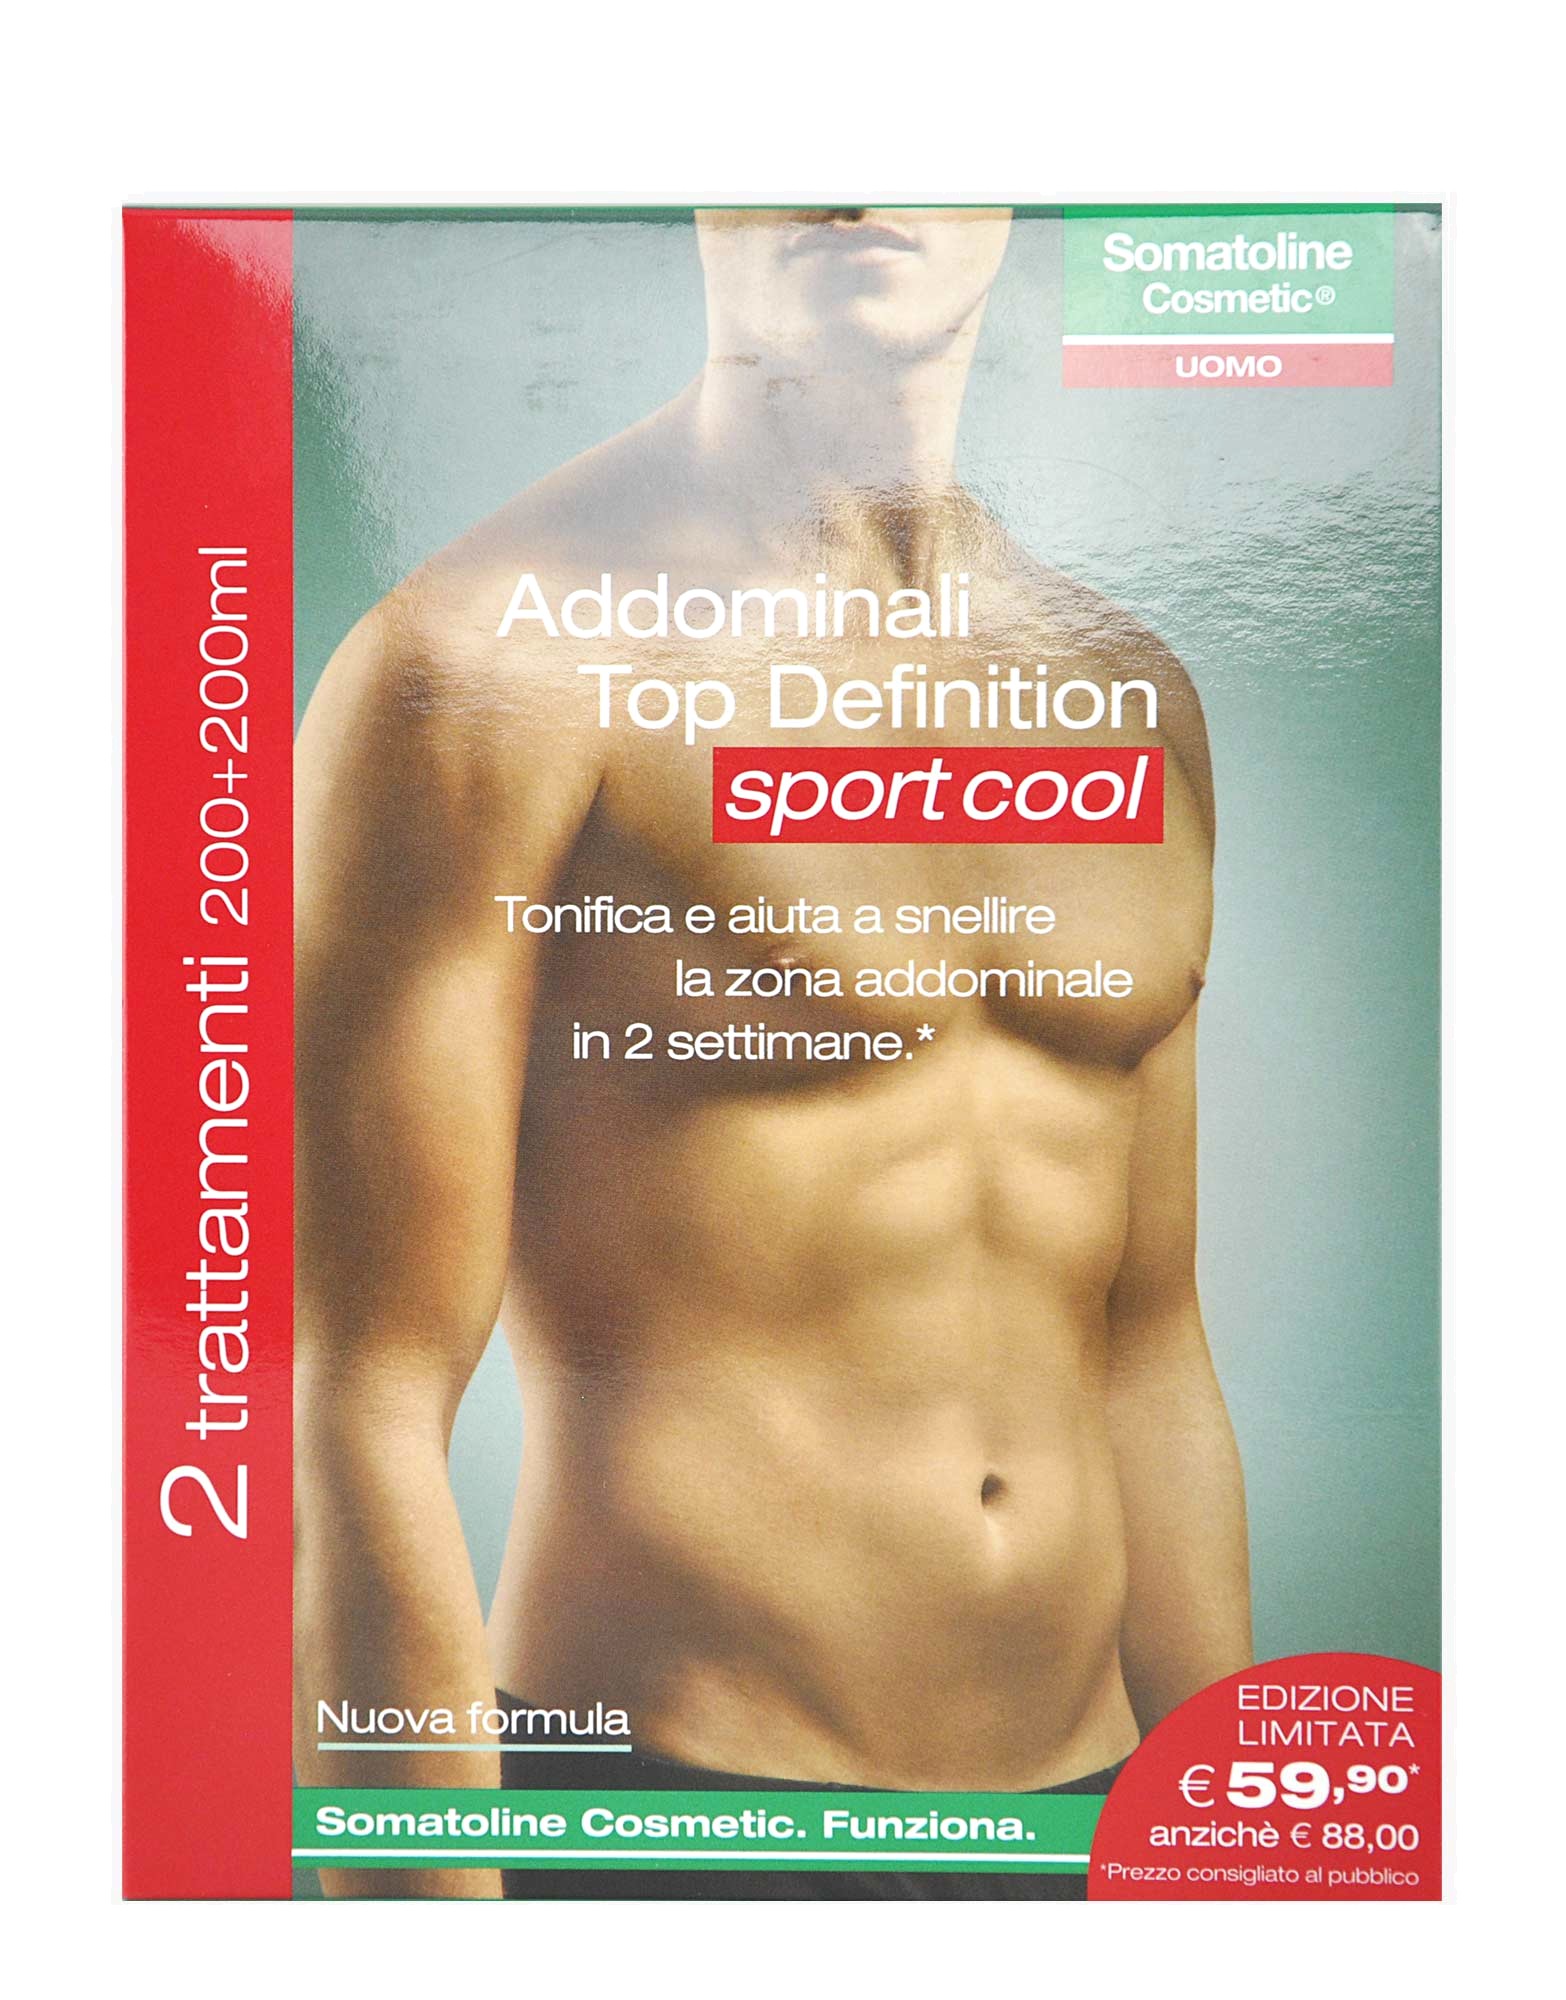 Somatoline Cosmetic Homme Abdominaux Top Definition Sport